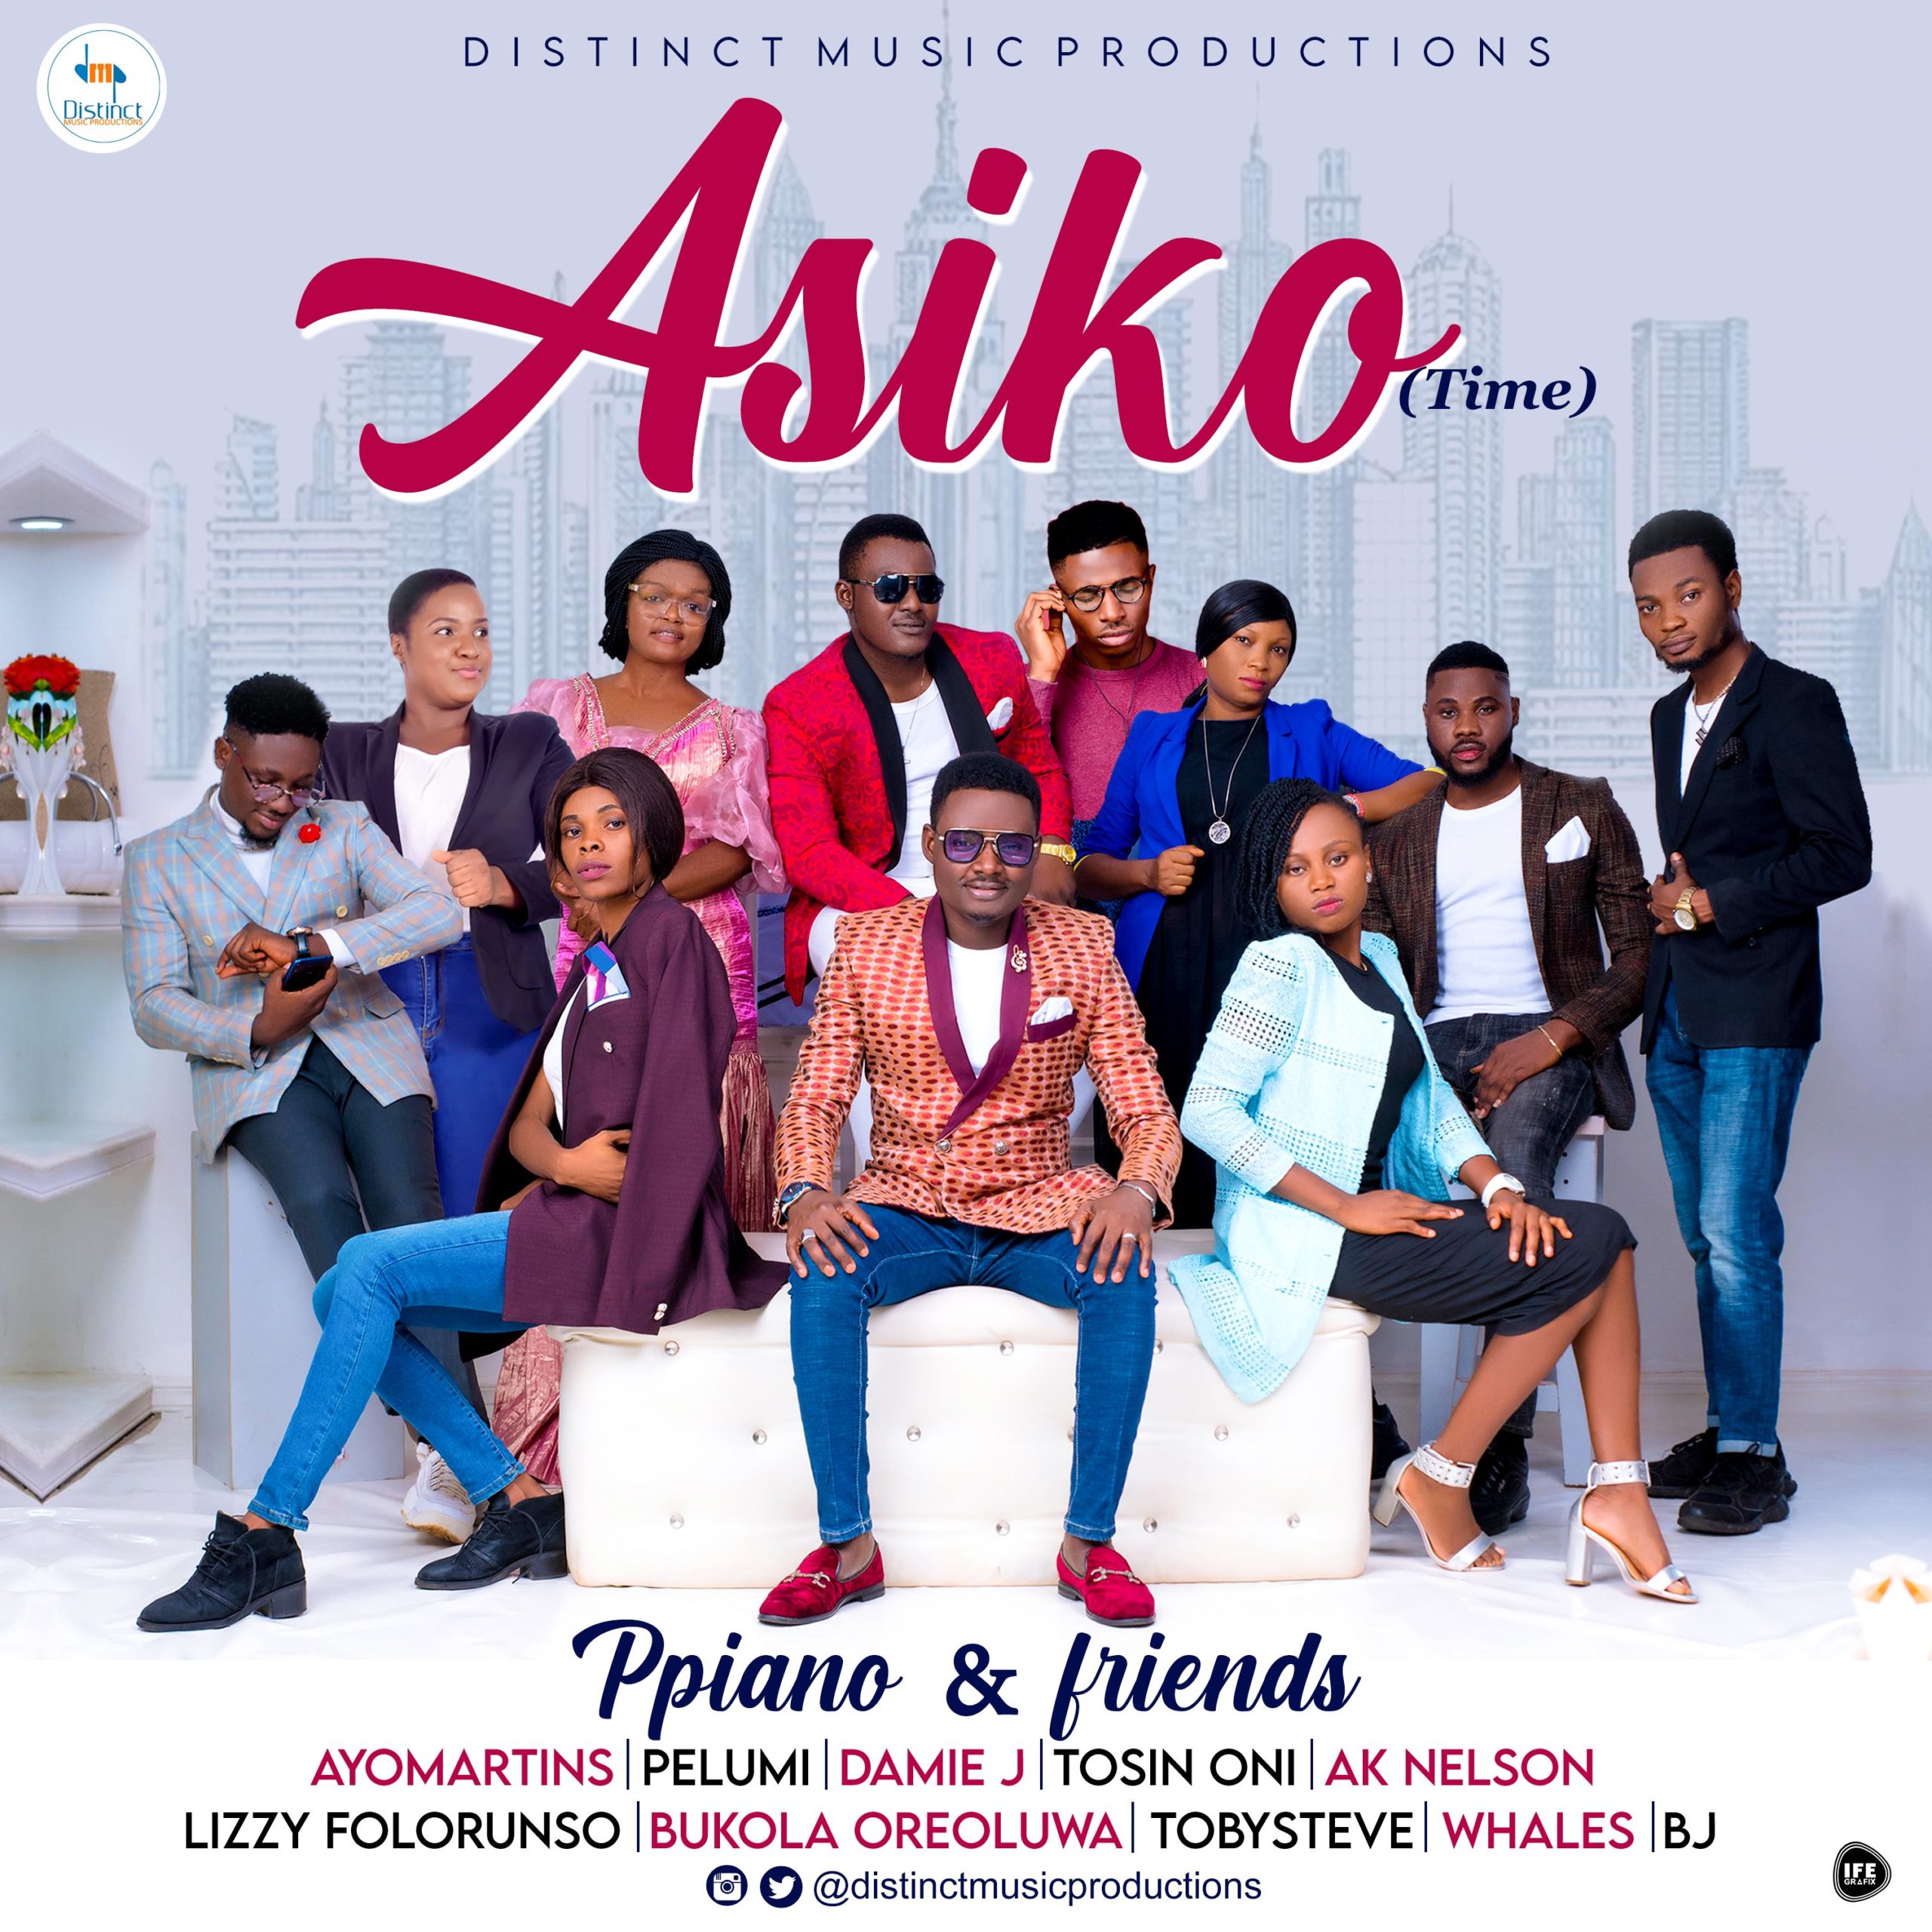 DOWNLOAD Music: Ppiano And Friends - ASIKO (Time)